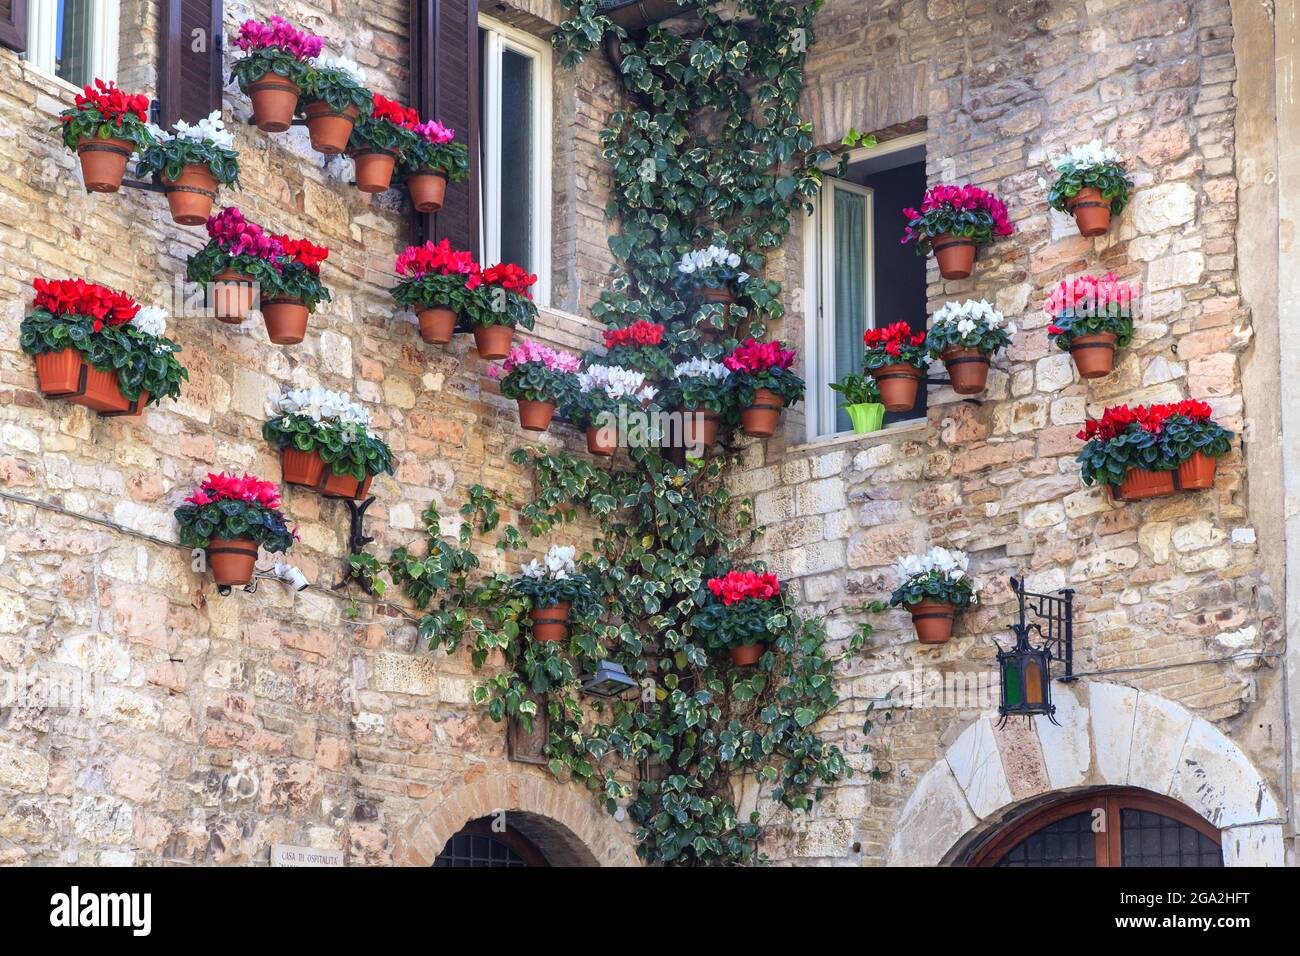 Close-up of the exterior of an old building with colorful flower pots suspended vertically on the stone walls Stock Photo